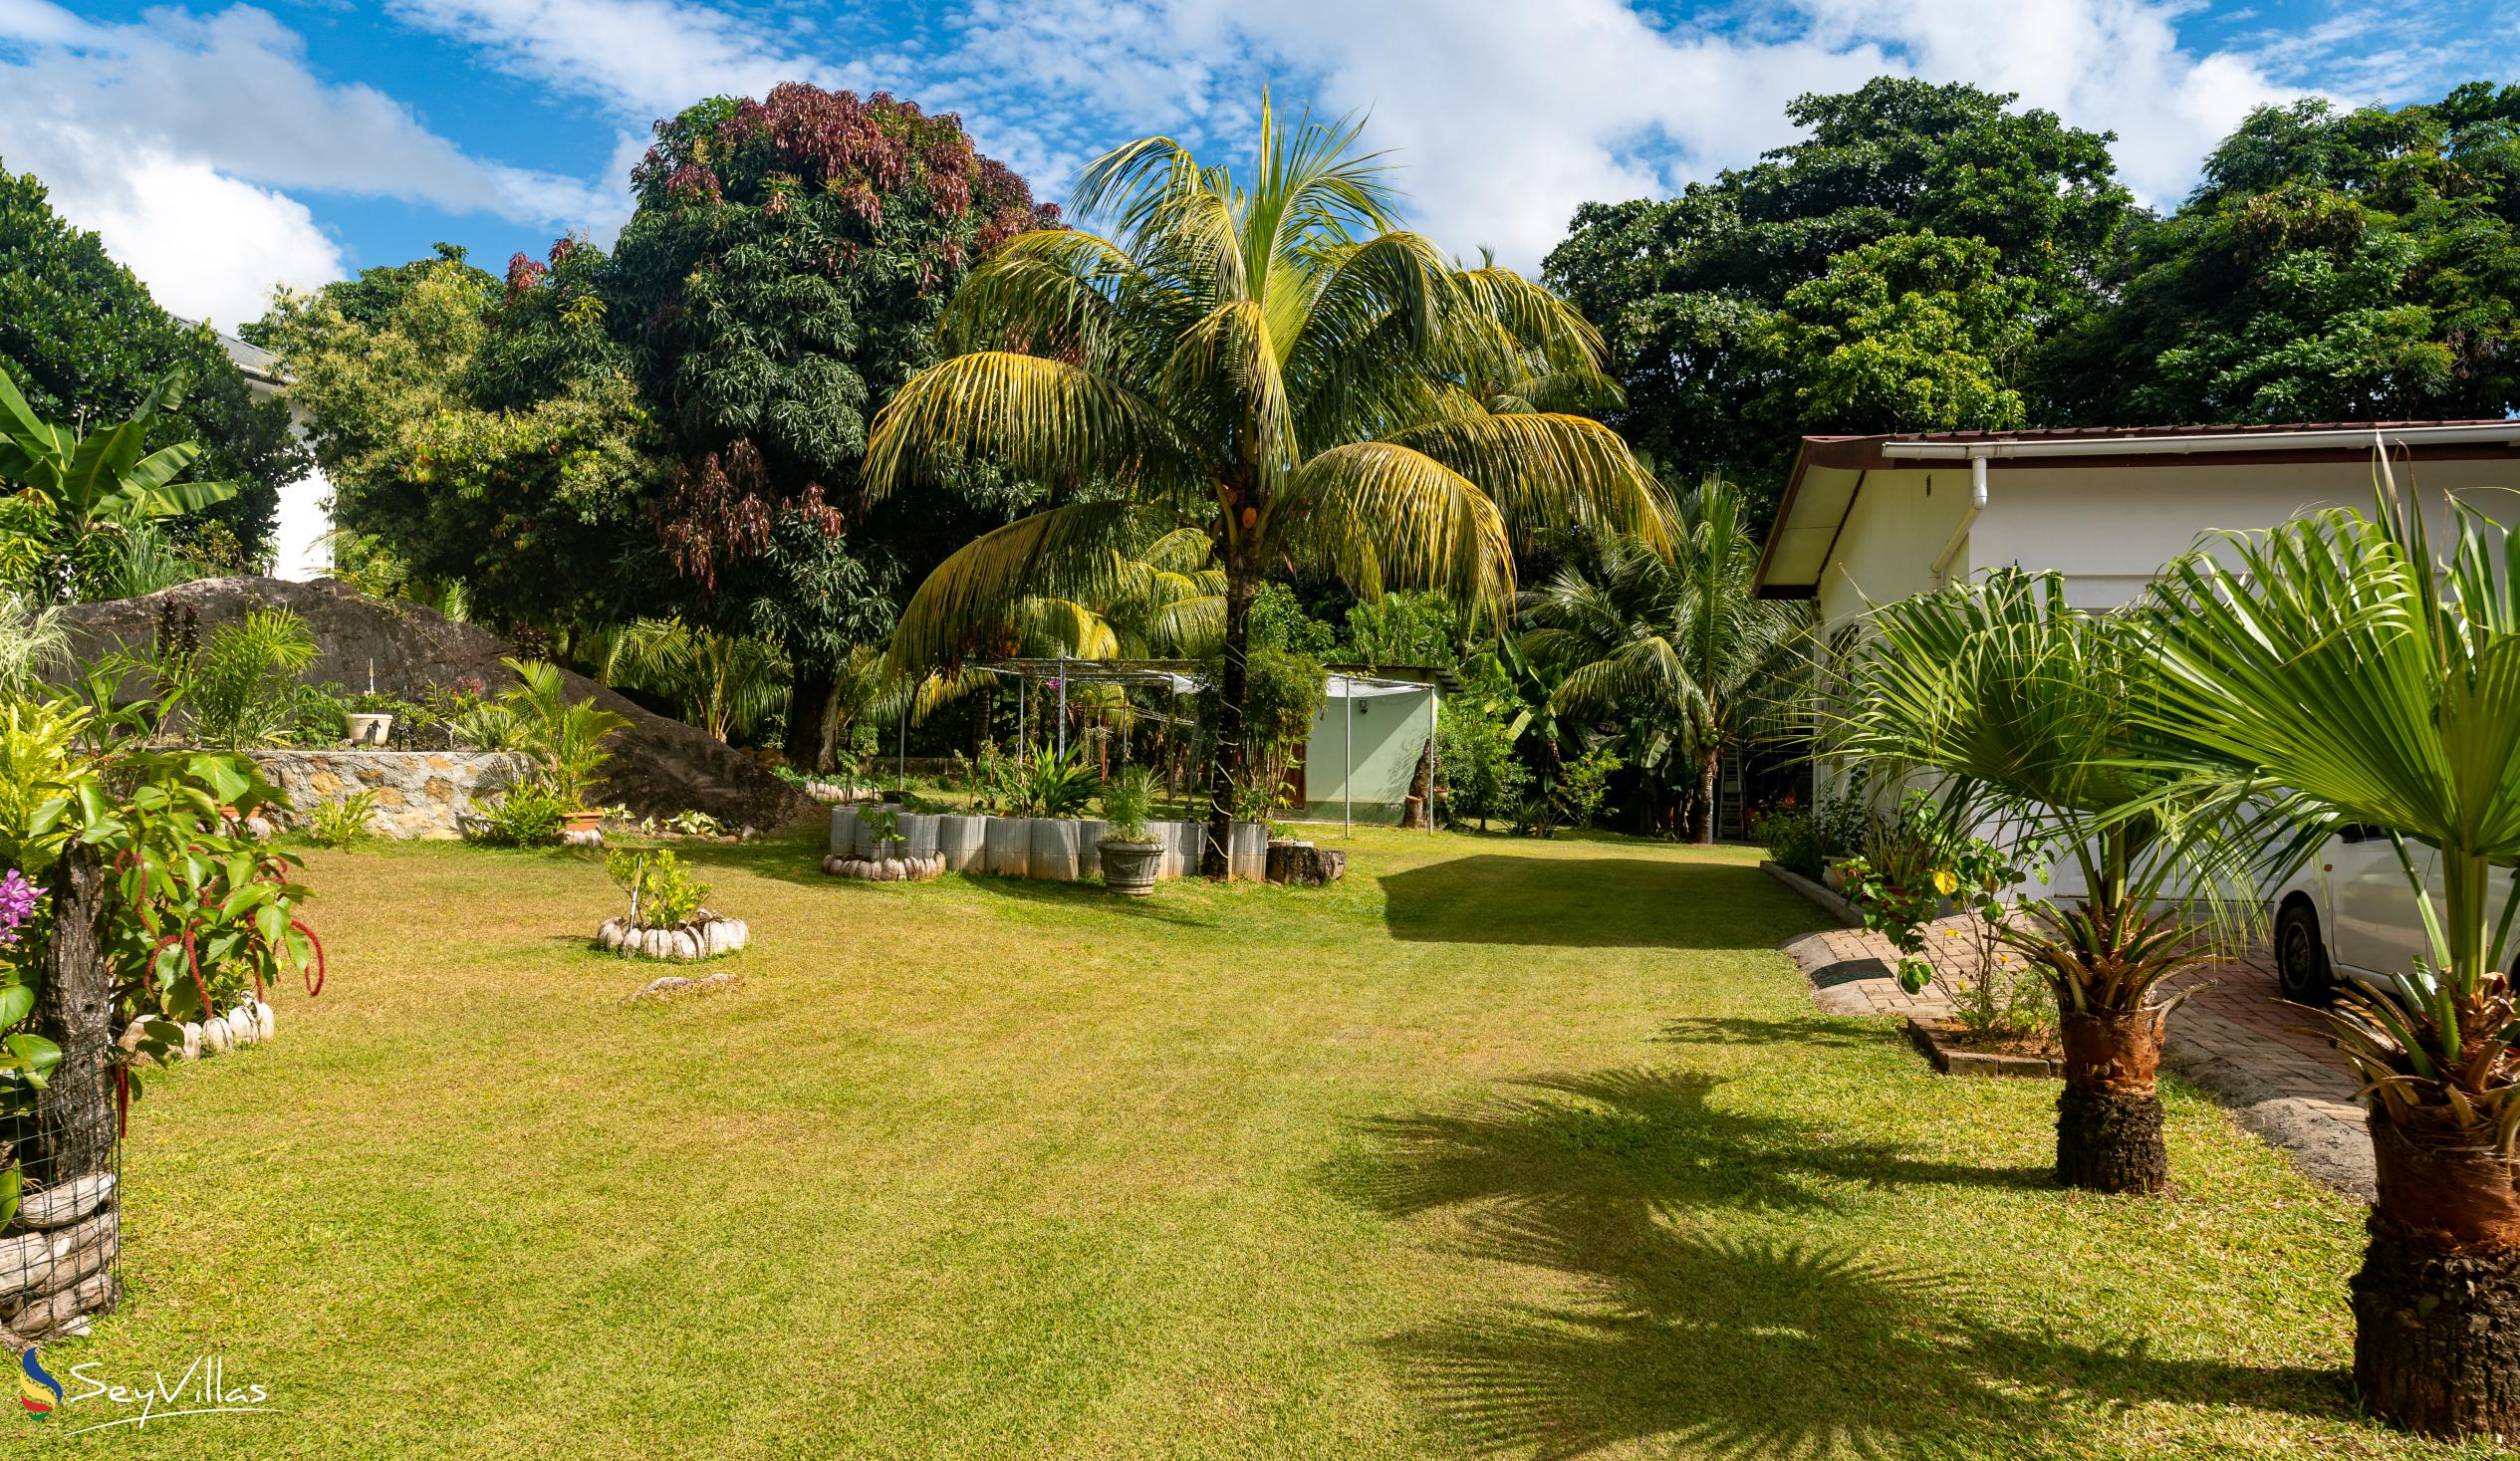 Foto 11: The Orchard Holiday Home - Esterno - Mahé (Seychelles)